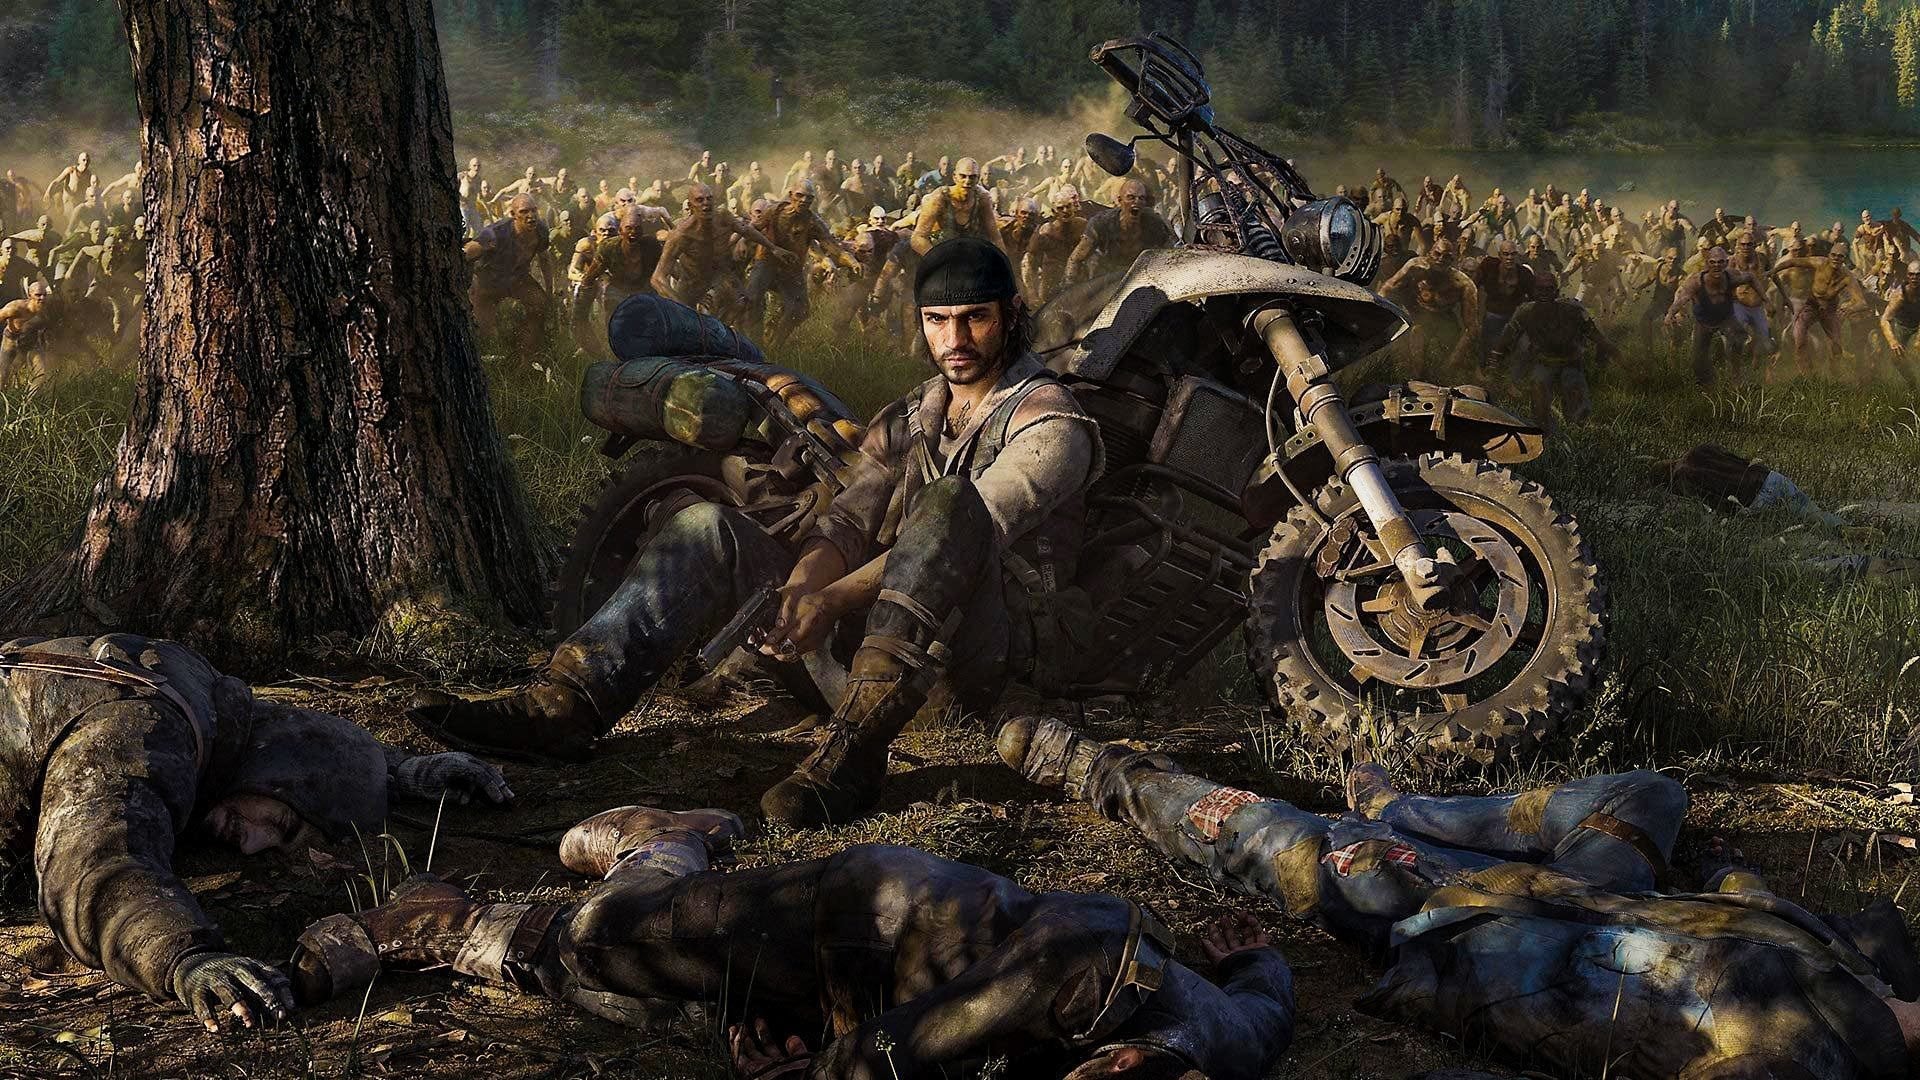 Image for Days Gone director says game sold about as well as Tsushima, but management made it feel like a disappointment